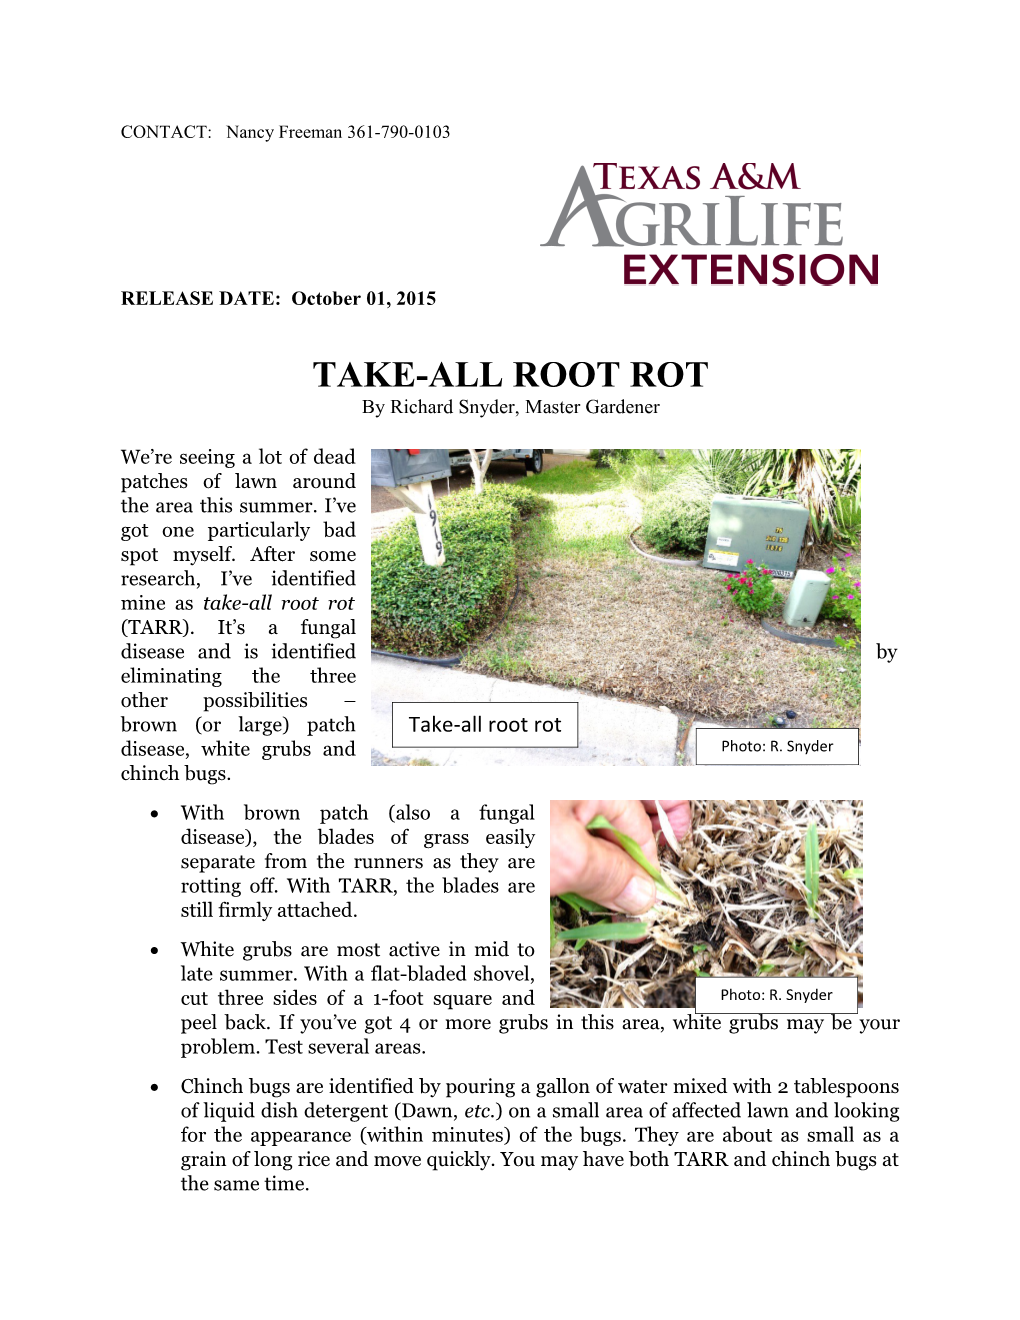 Take-All Root Rot